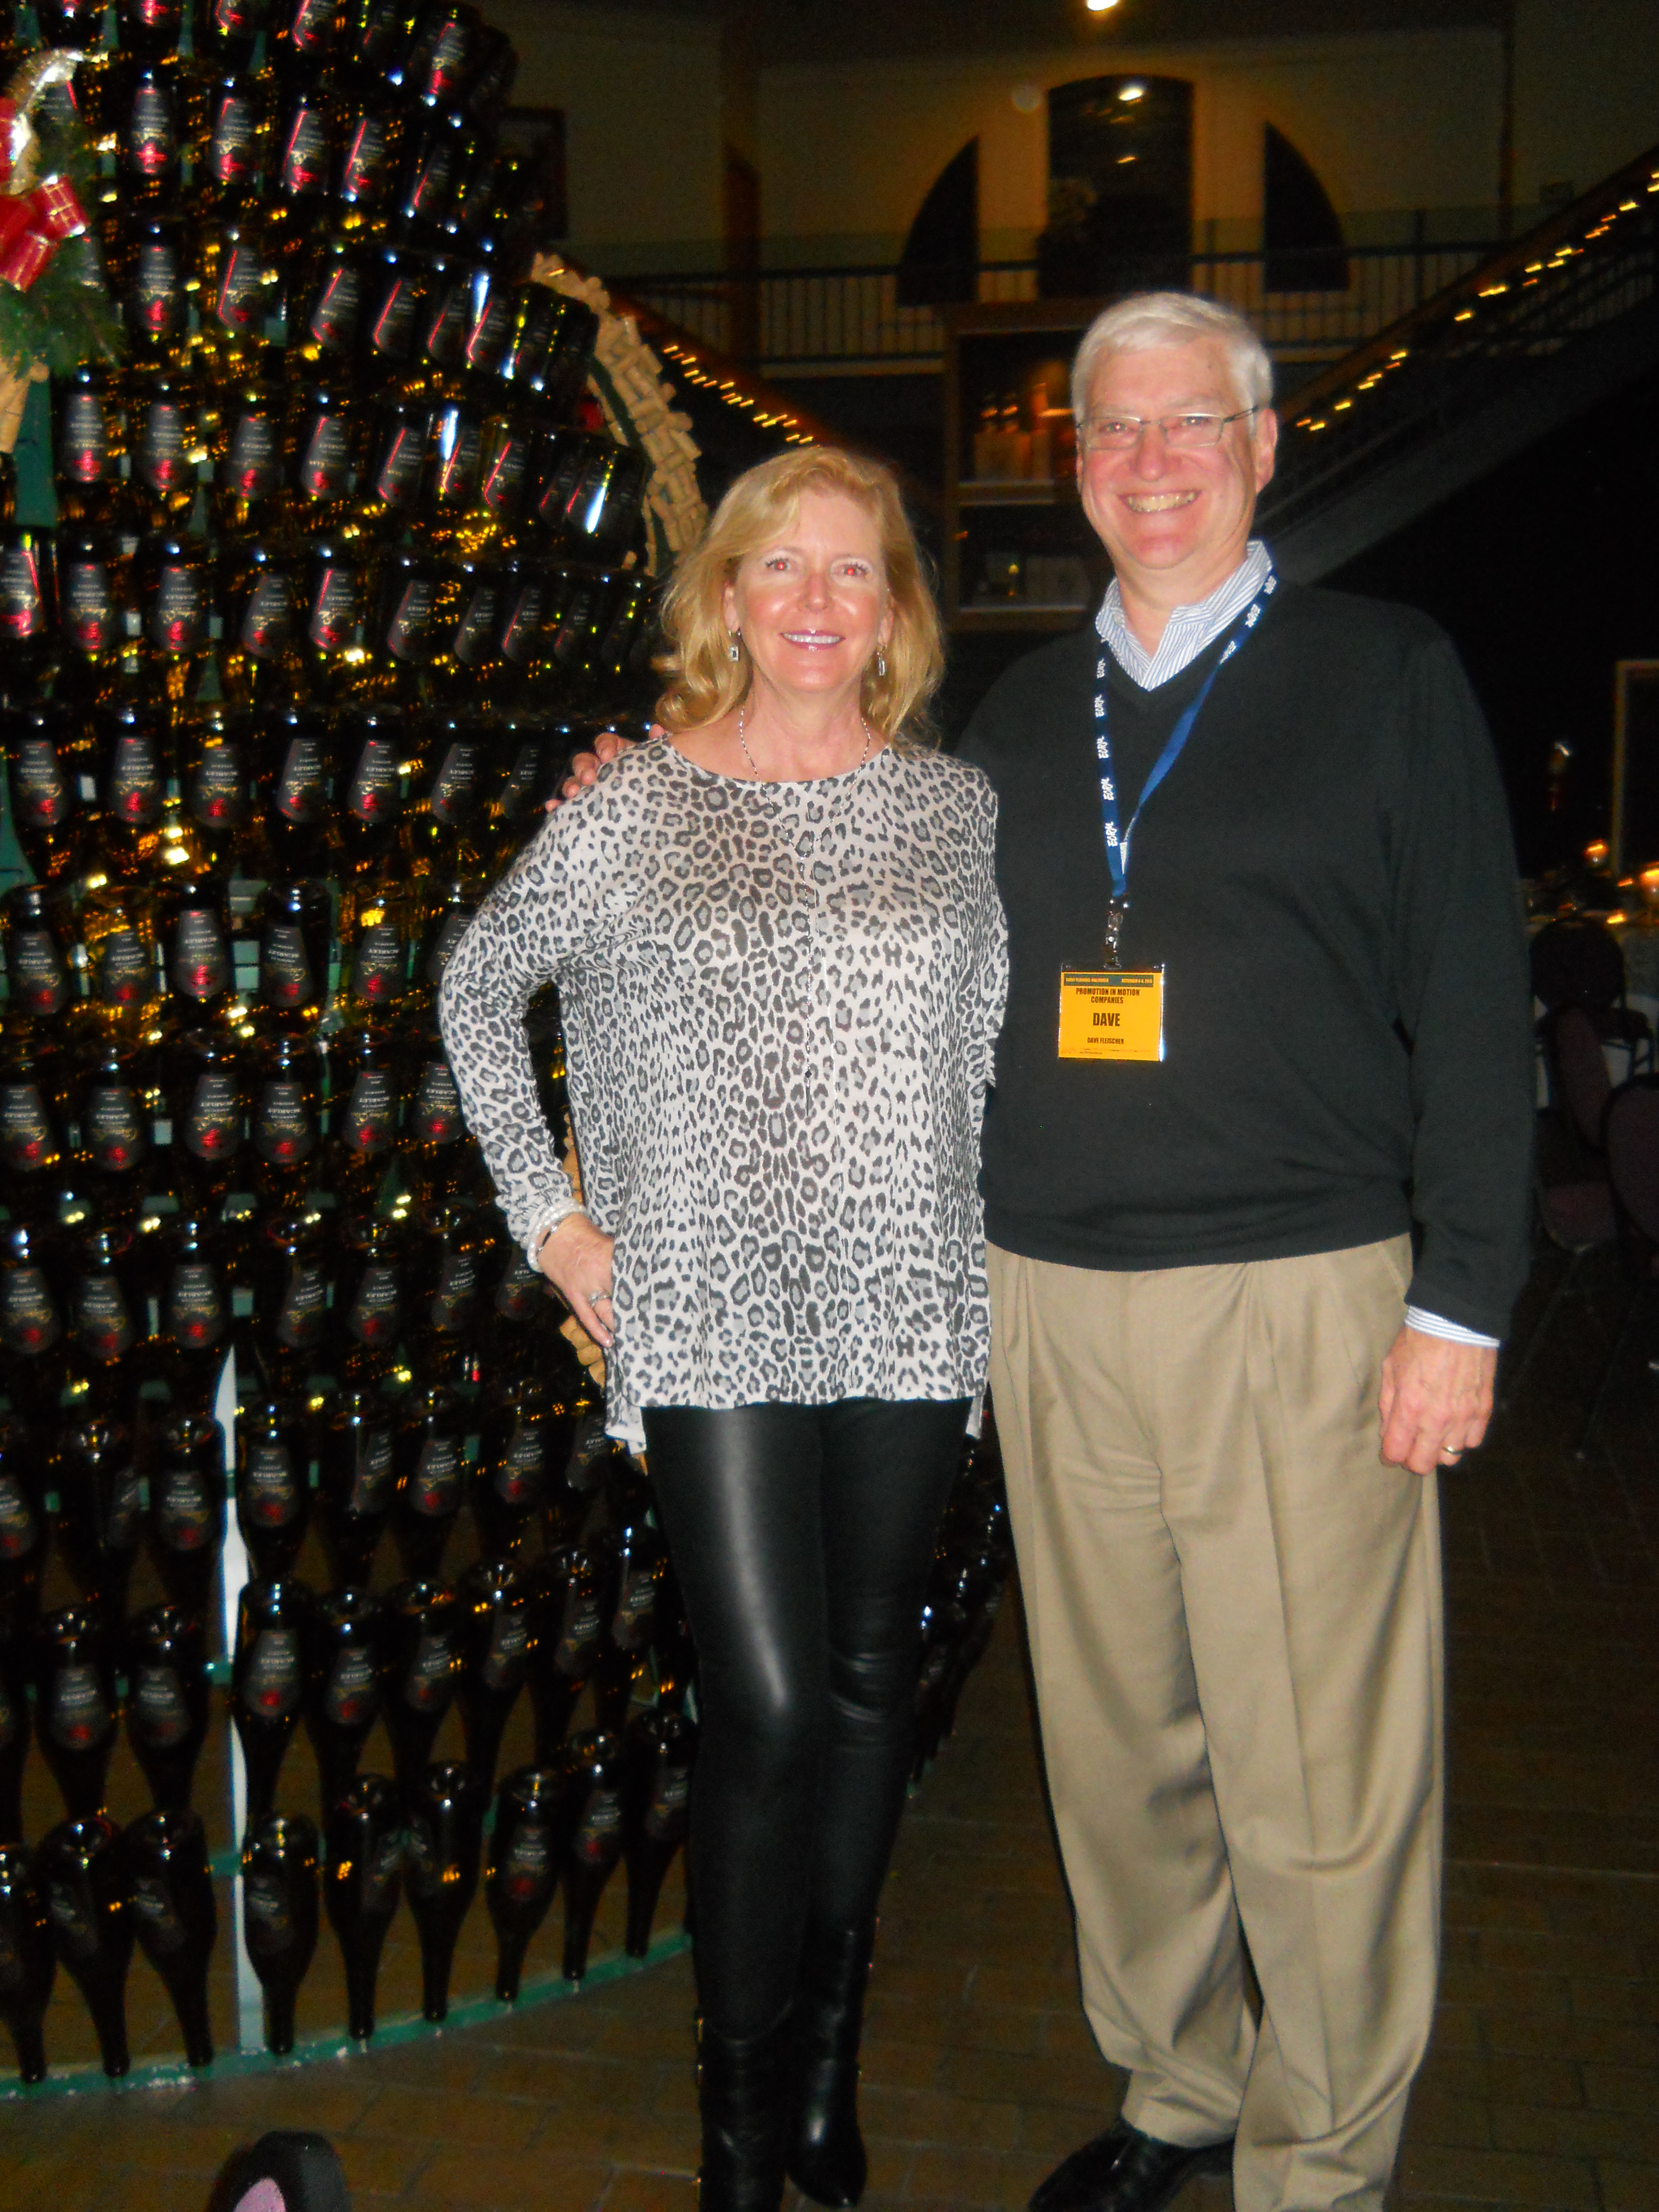 Dave Fleischer of Promotion in Motion (right) and ECRM's very own Kandi Webster pose for a picture by the tree!